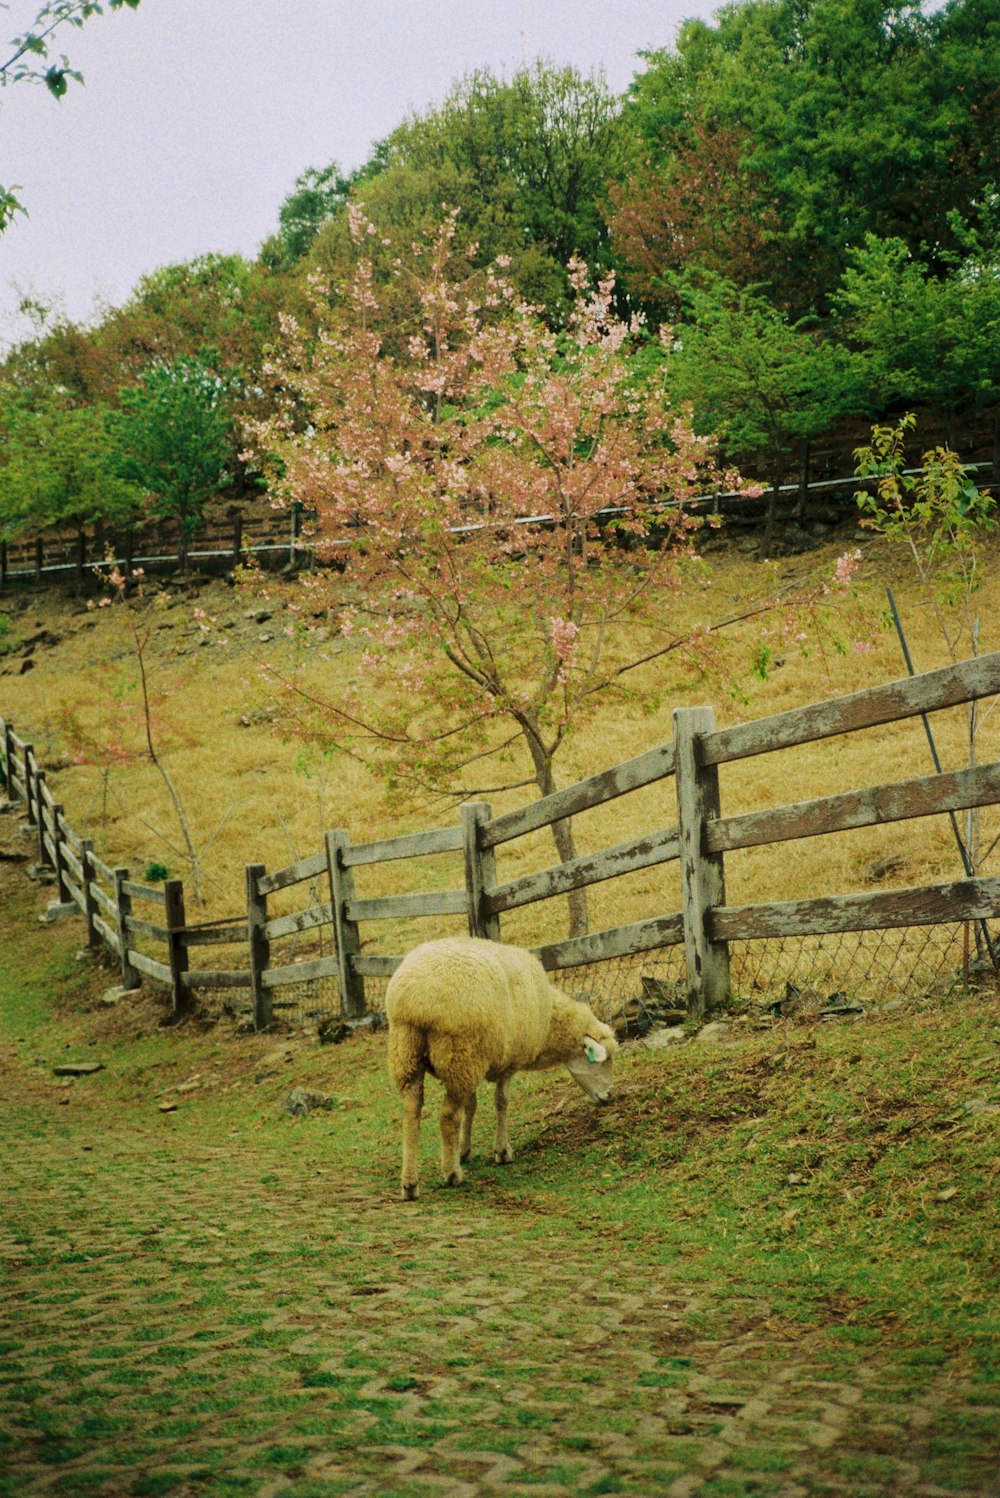 a sheep is standing in a fenced in area